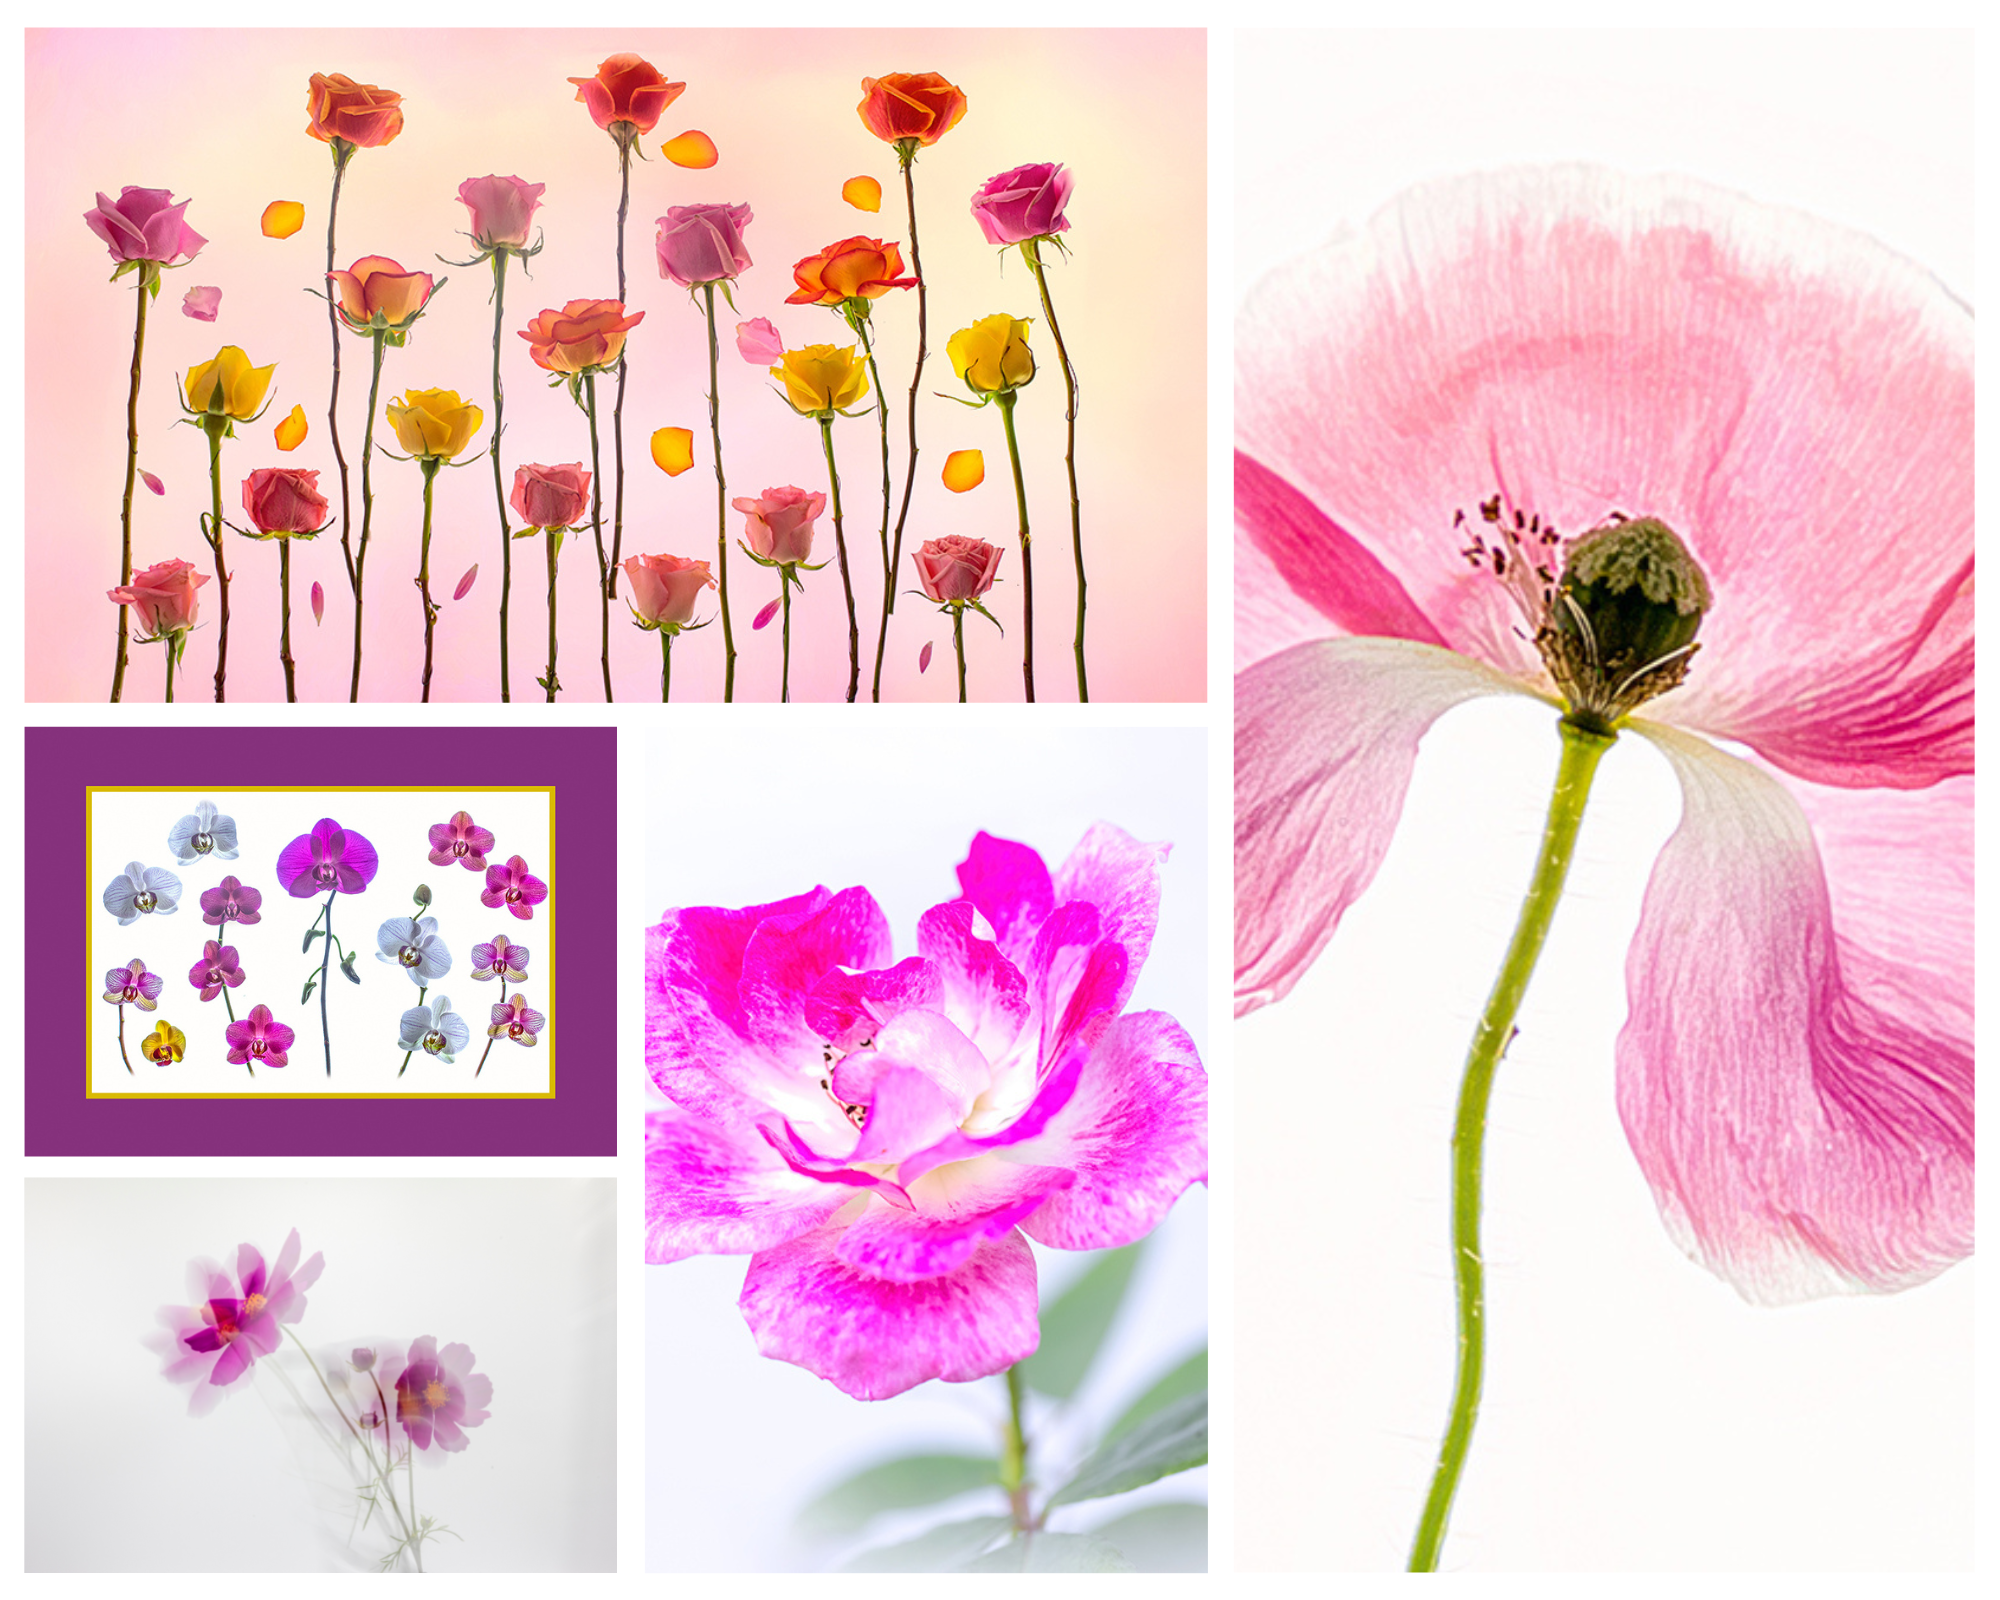 learn with mackay flower photographer creative and macro photography